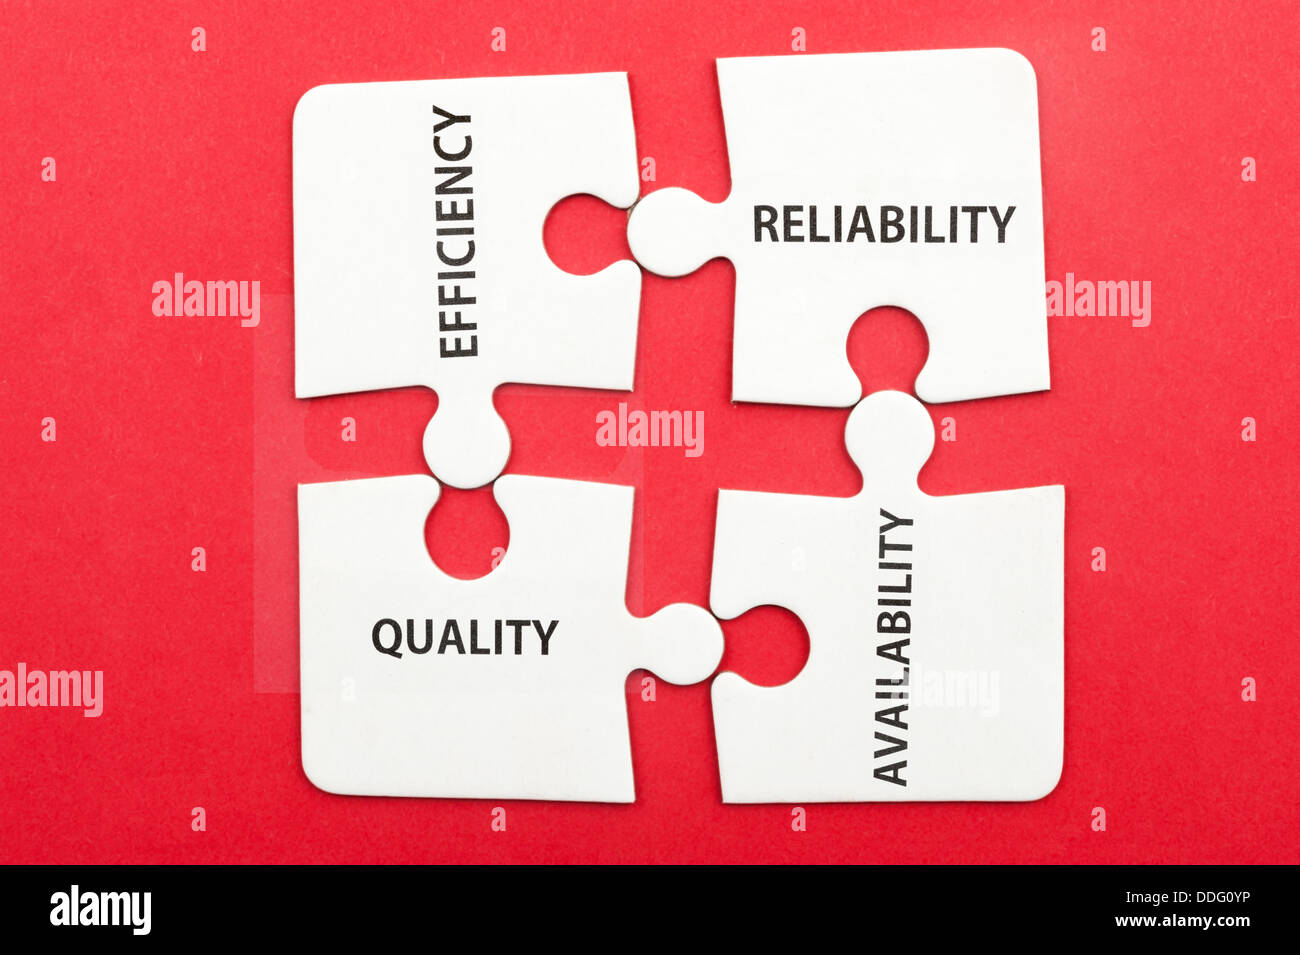 Concept of service: efficiency, reliability, quality and availability Stock Photo